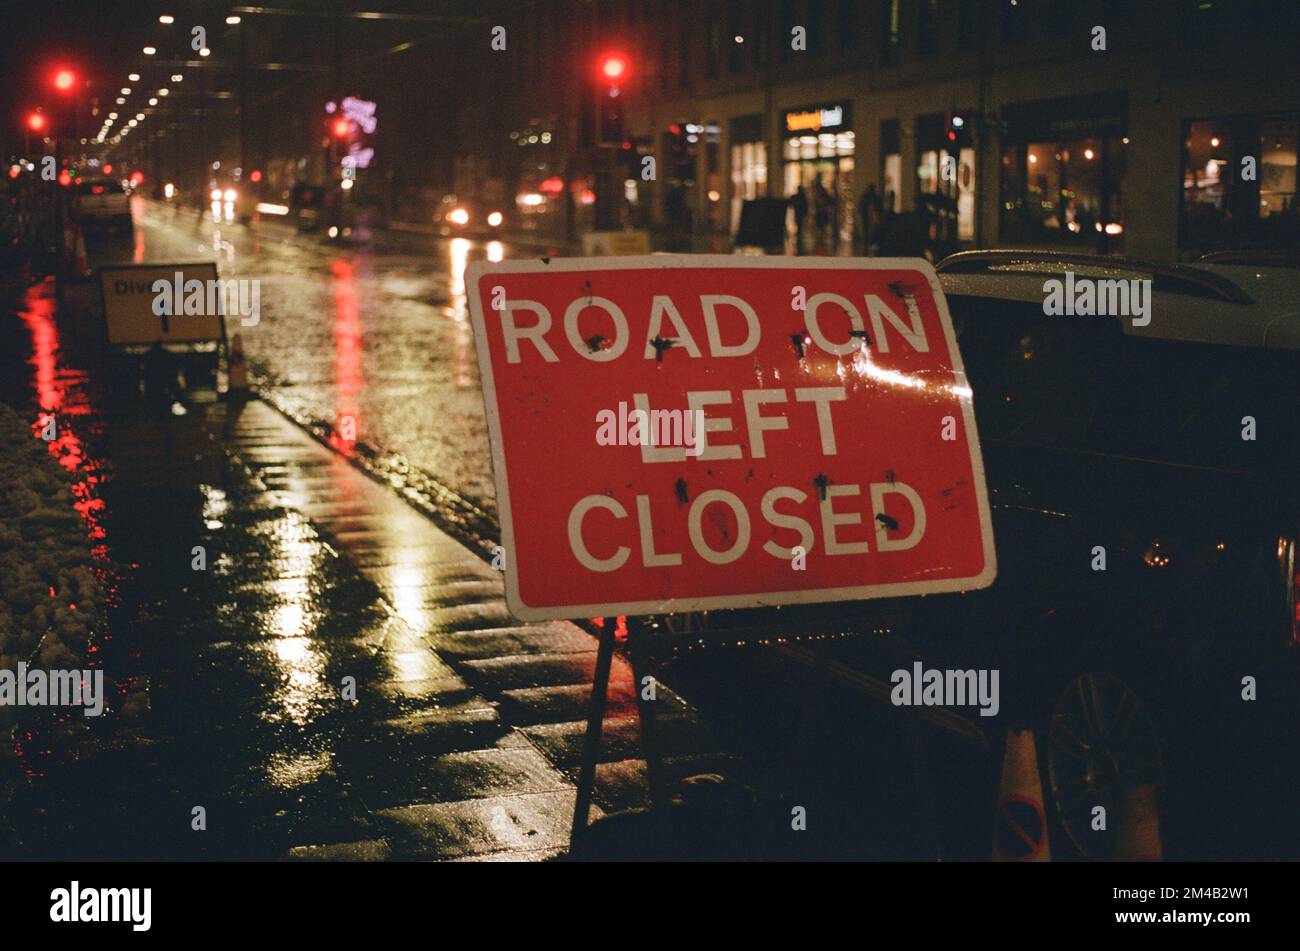 'Road on left closed' and 'Diversion' construction signs at night, Edinburgh, Scotland Stock Photo